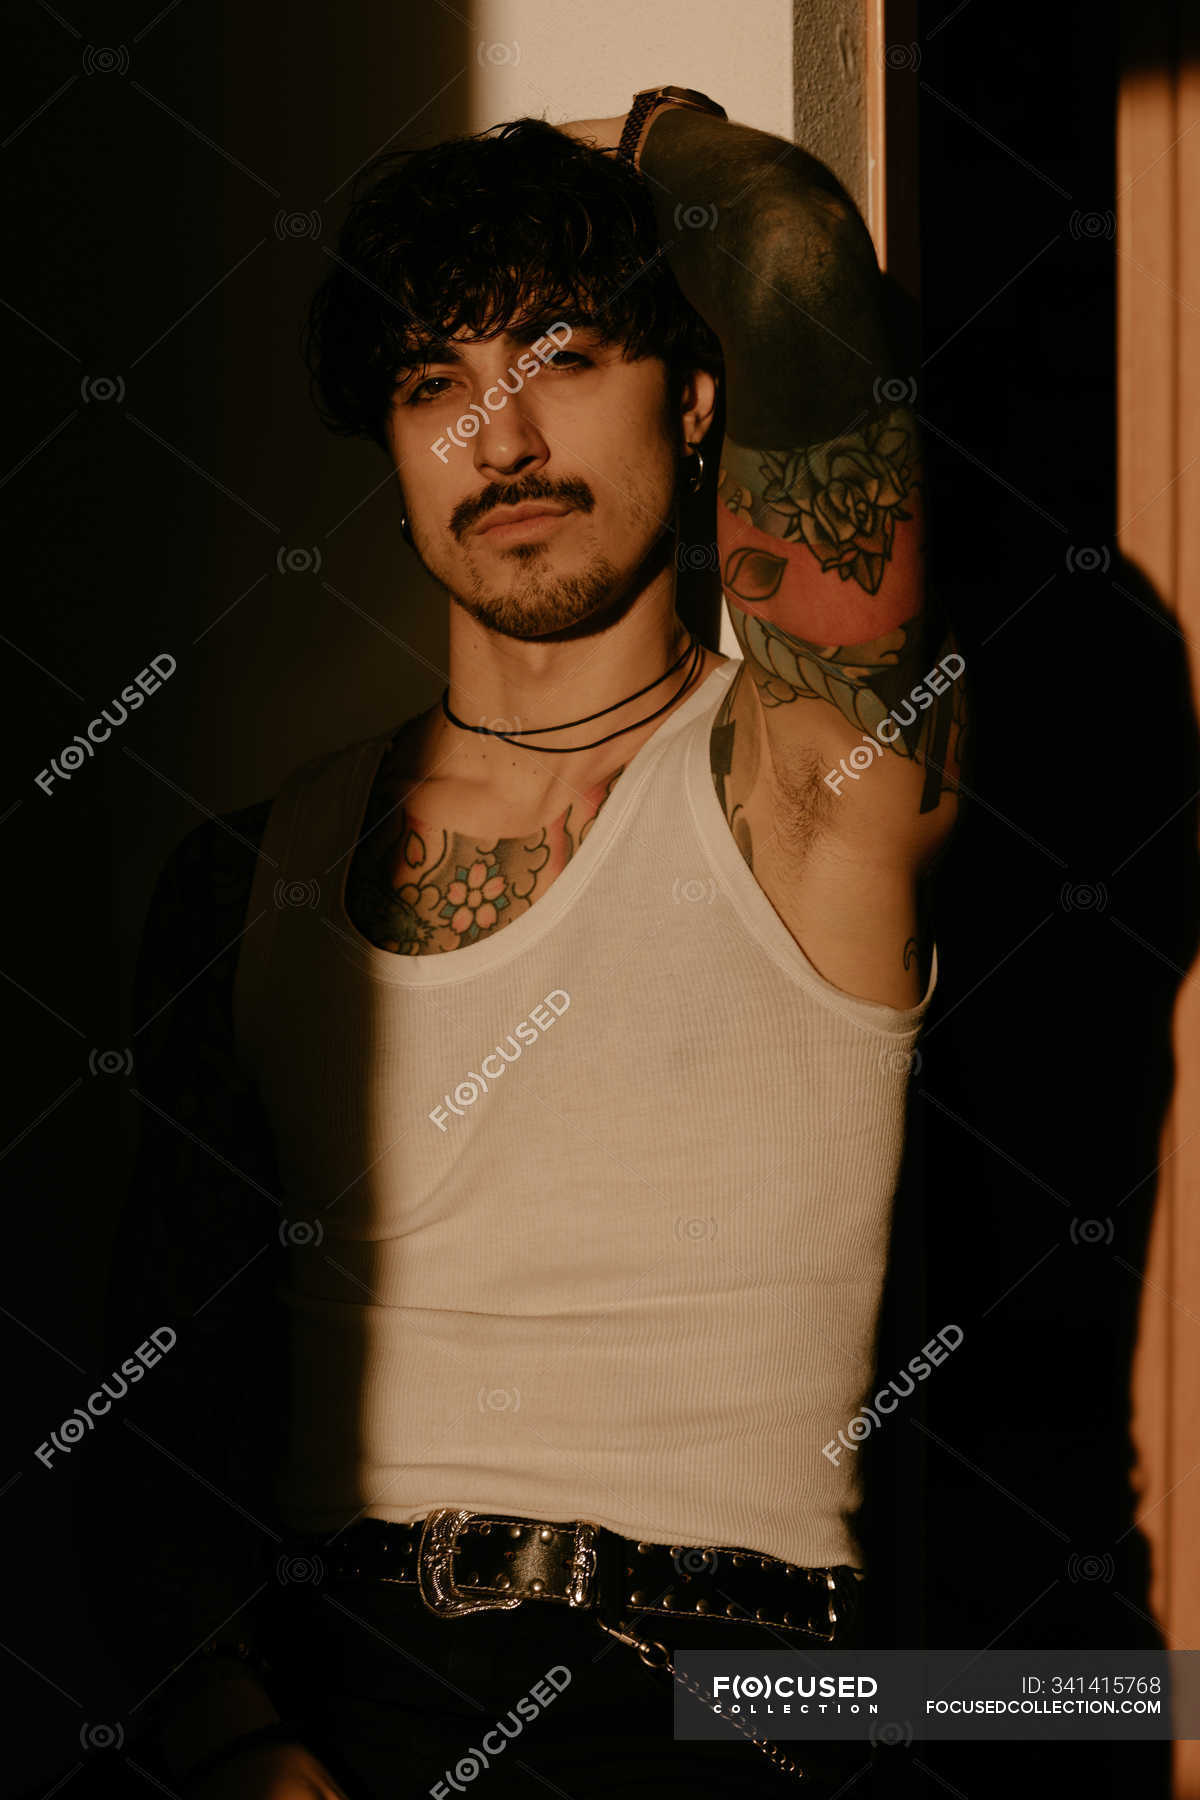 Young stylish hipster man with tattoos in white tank top leaning against  wall, looking in camera — fashionable, indoors - Stock Photo | #341415768